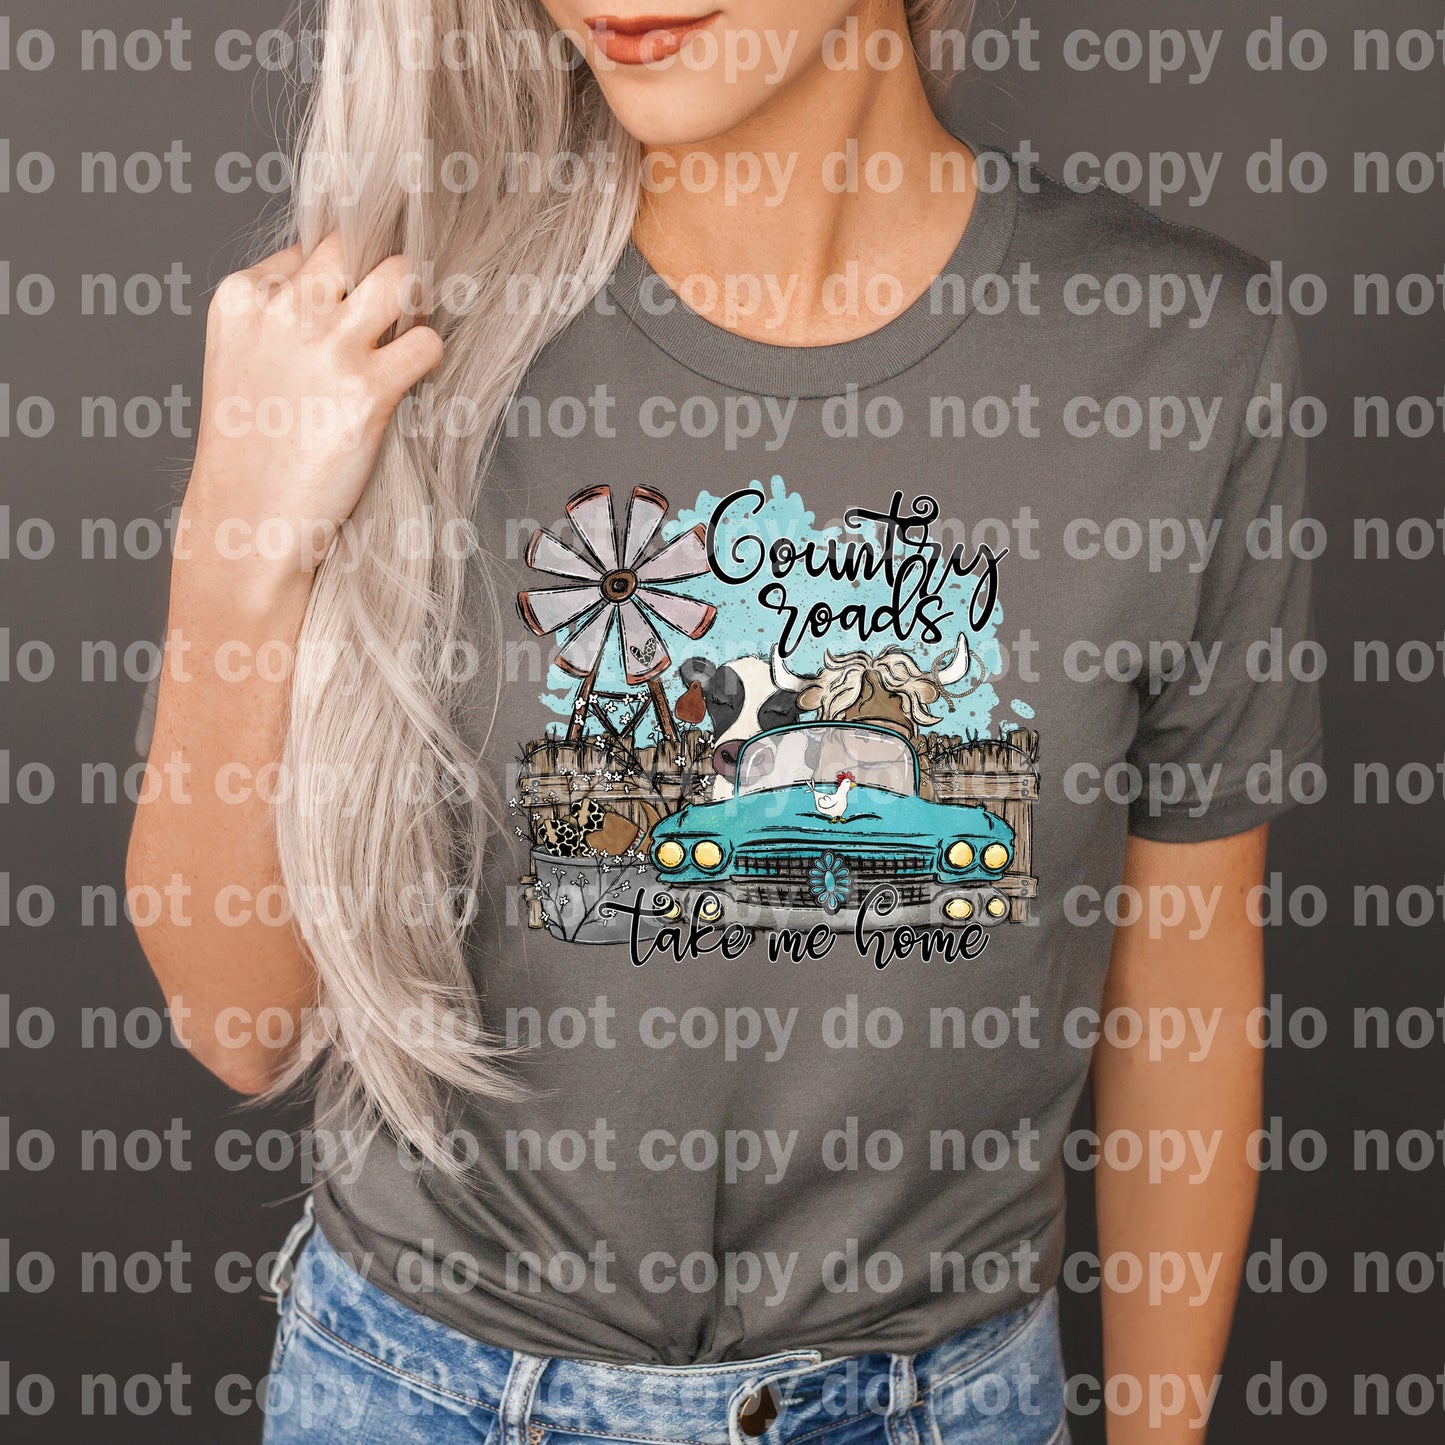 Country Roads Take Me Home Dream Print or Sublimation Print